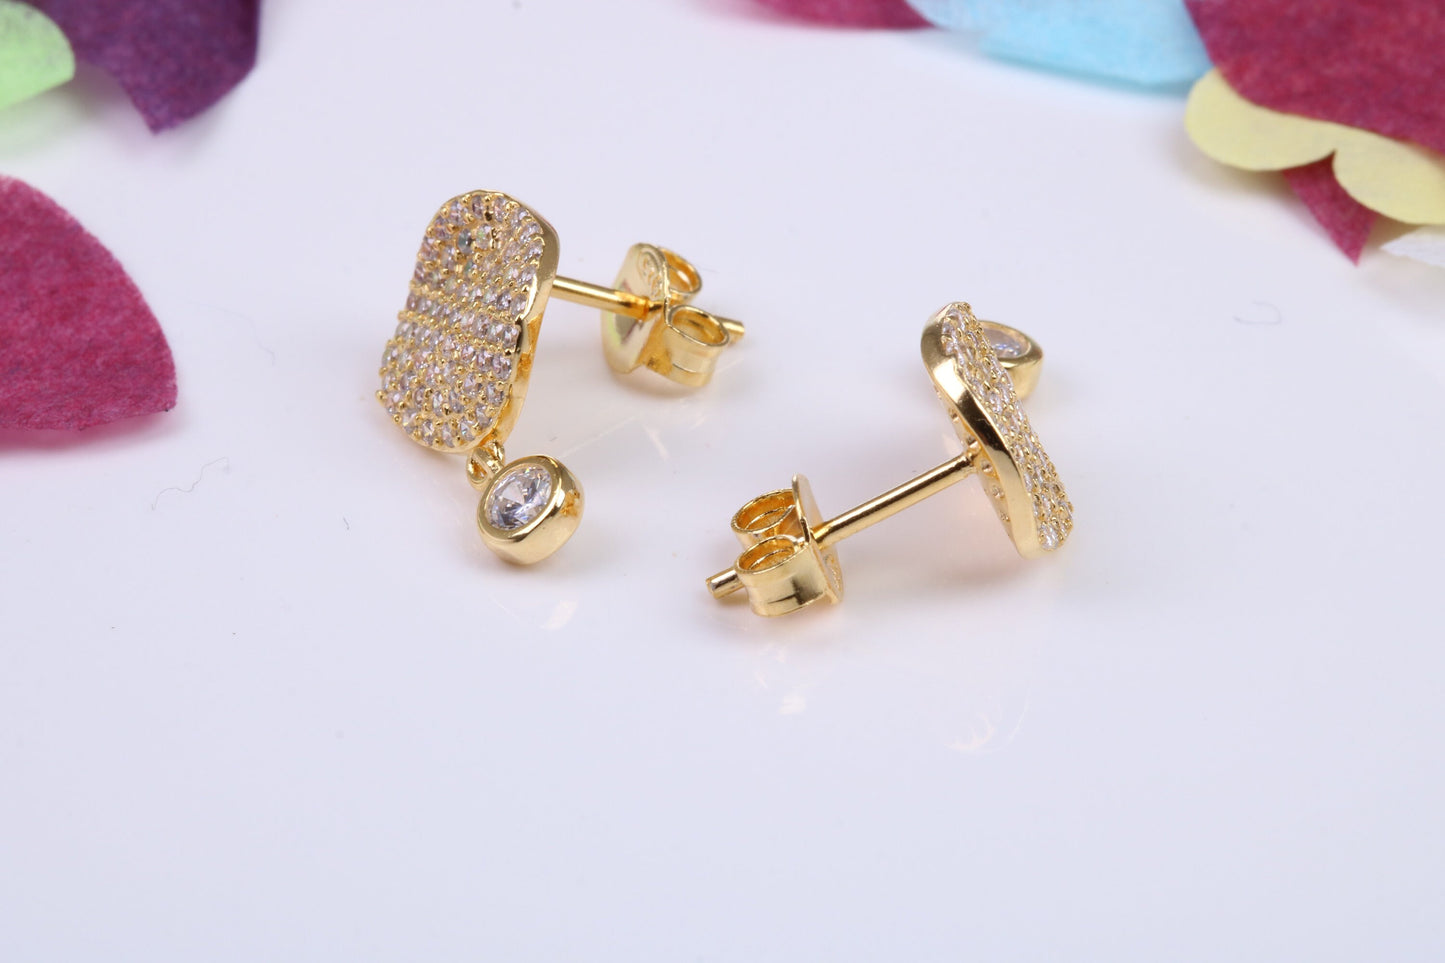 10 mm Round Dropper Stud Earrings, Cubic Zirconia set, Made from Solid 925 Grade Sterling Silver. Yellow Gold Plated